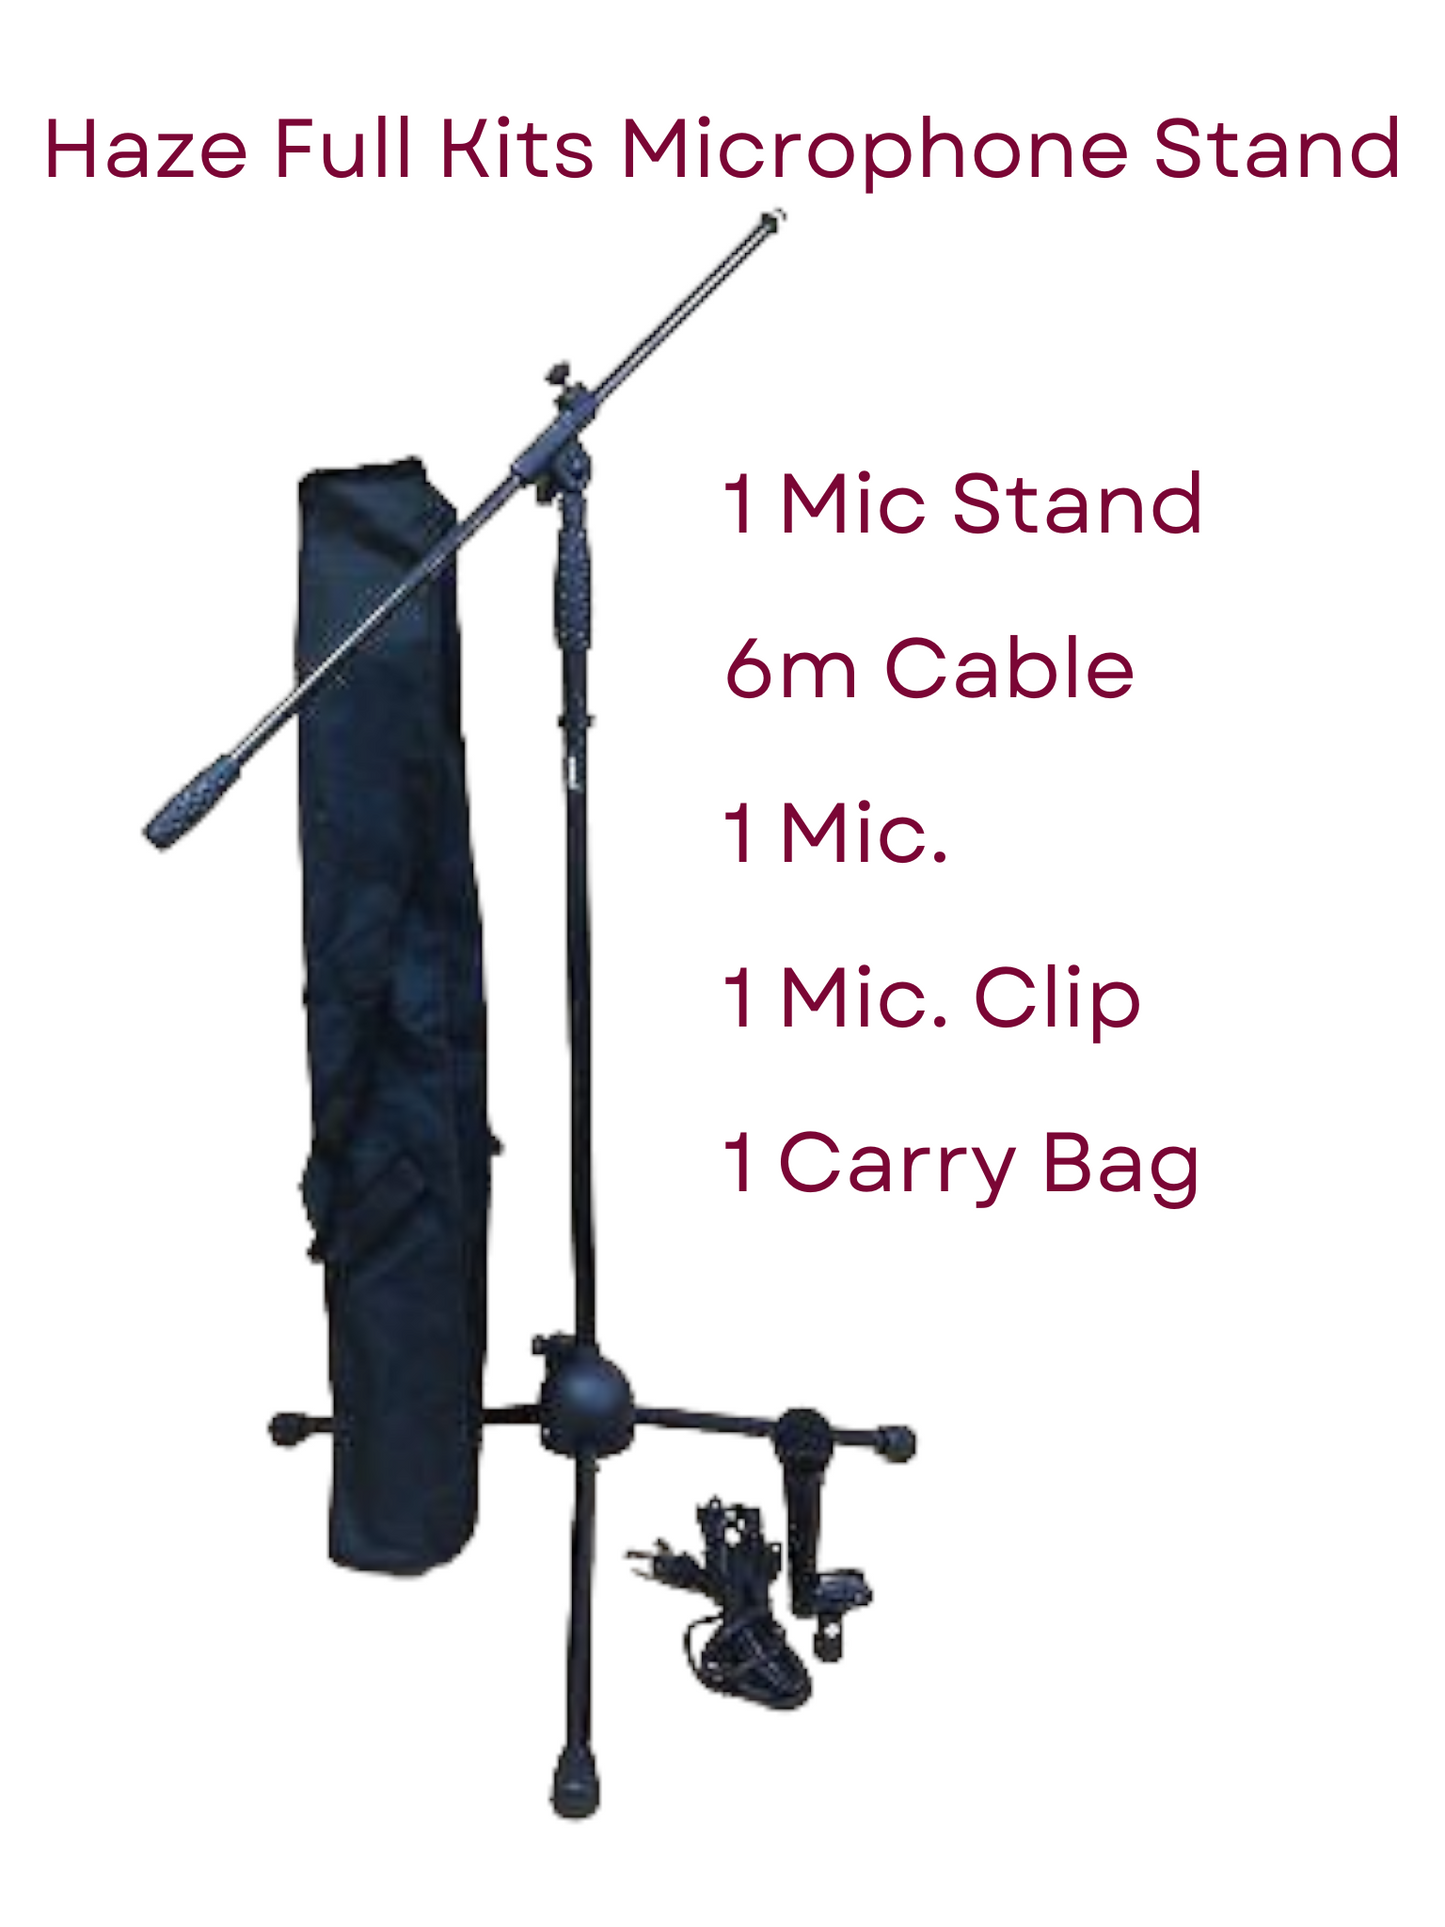 Haze MS1 Adjustable Telescopic Boom Microphone Stand + 6m Cable, Mic, Clip, Carry Bag (Bulk Buy Options)